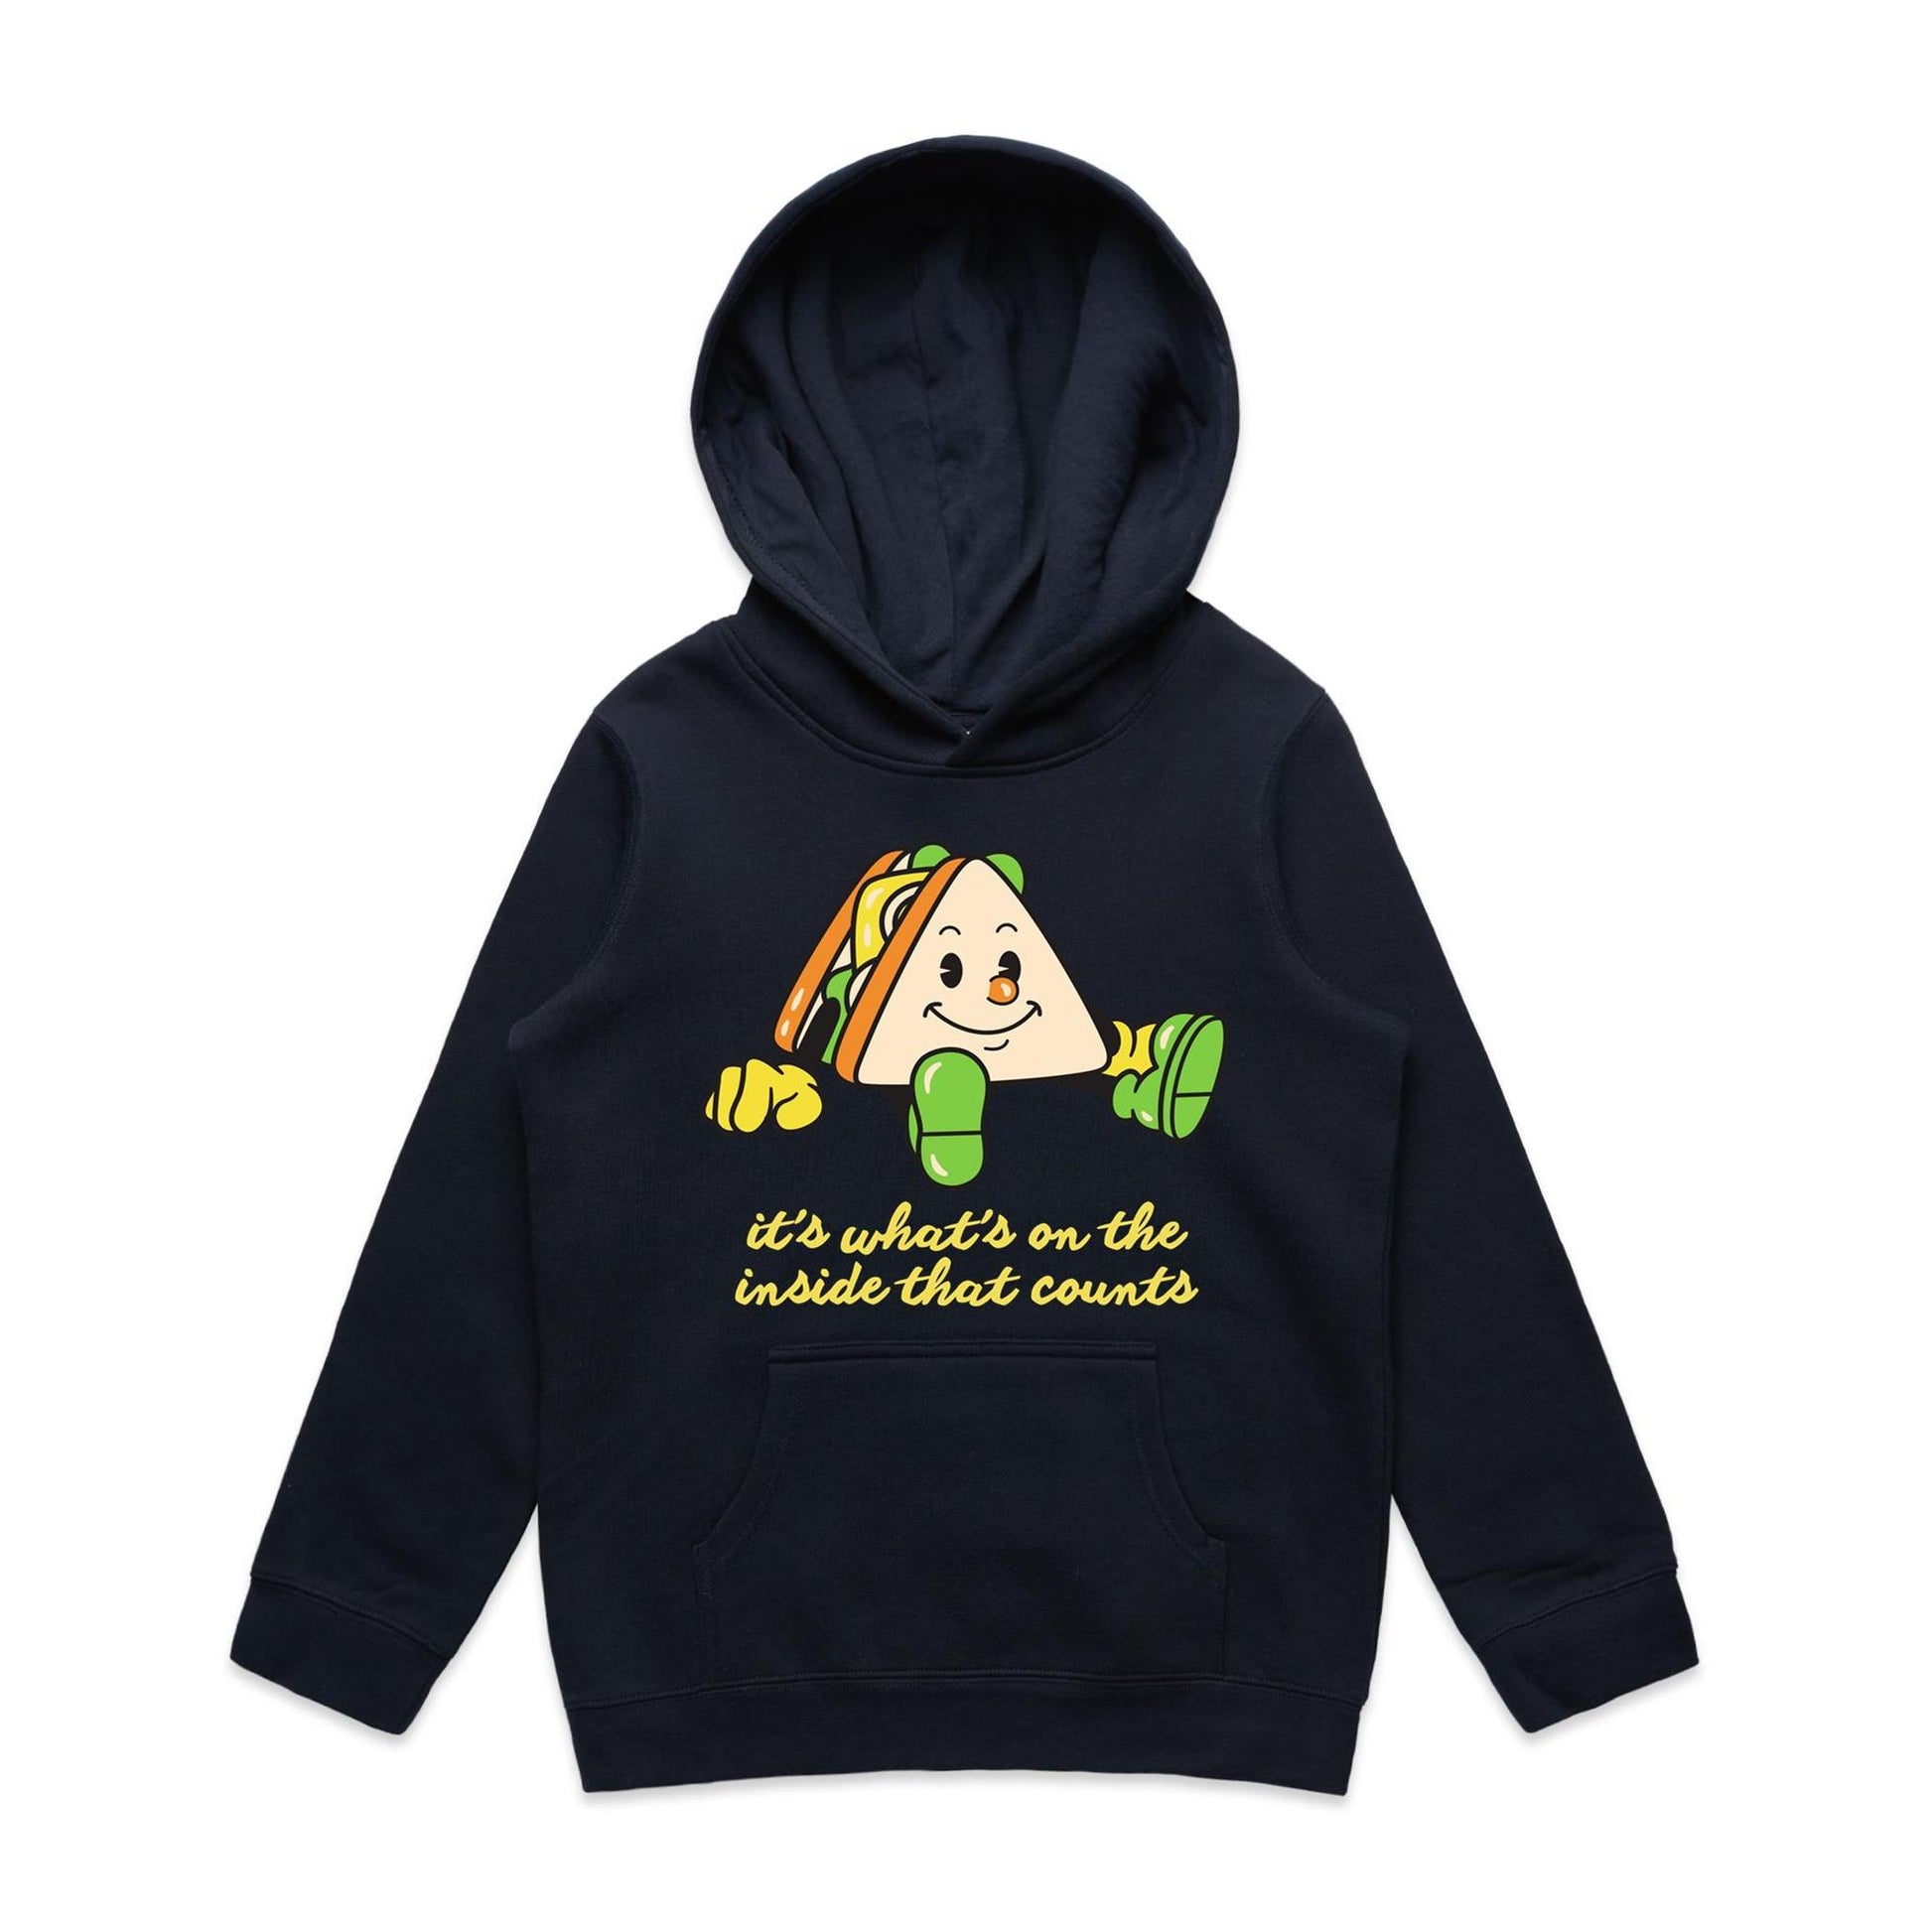 Sandwich, It's What's On The Inside That Counts - Youth Supply Hood Navy Kids Hoodie Food Motivation